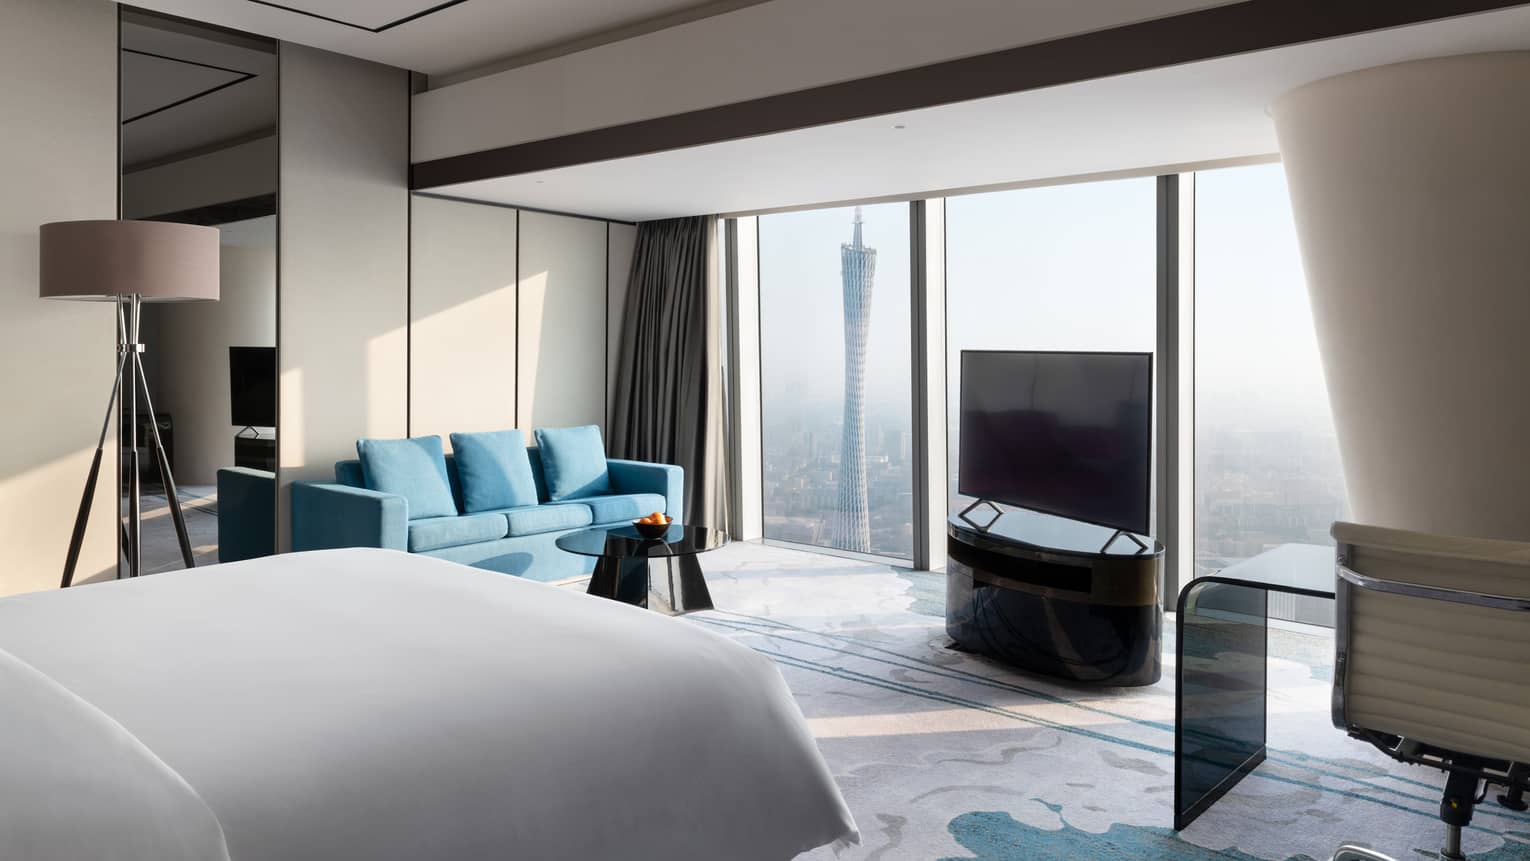 Premier King Canton Tower View Room with blue accents and floor-to-ceiling windows